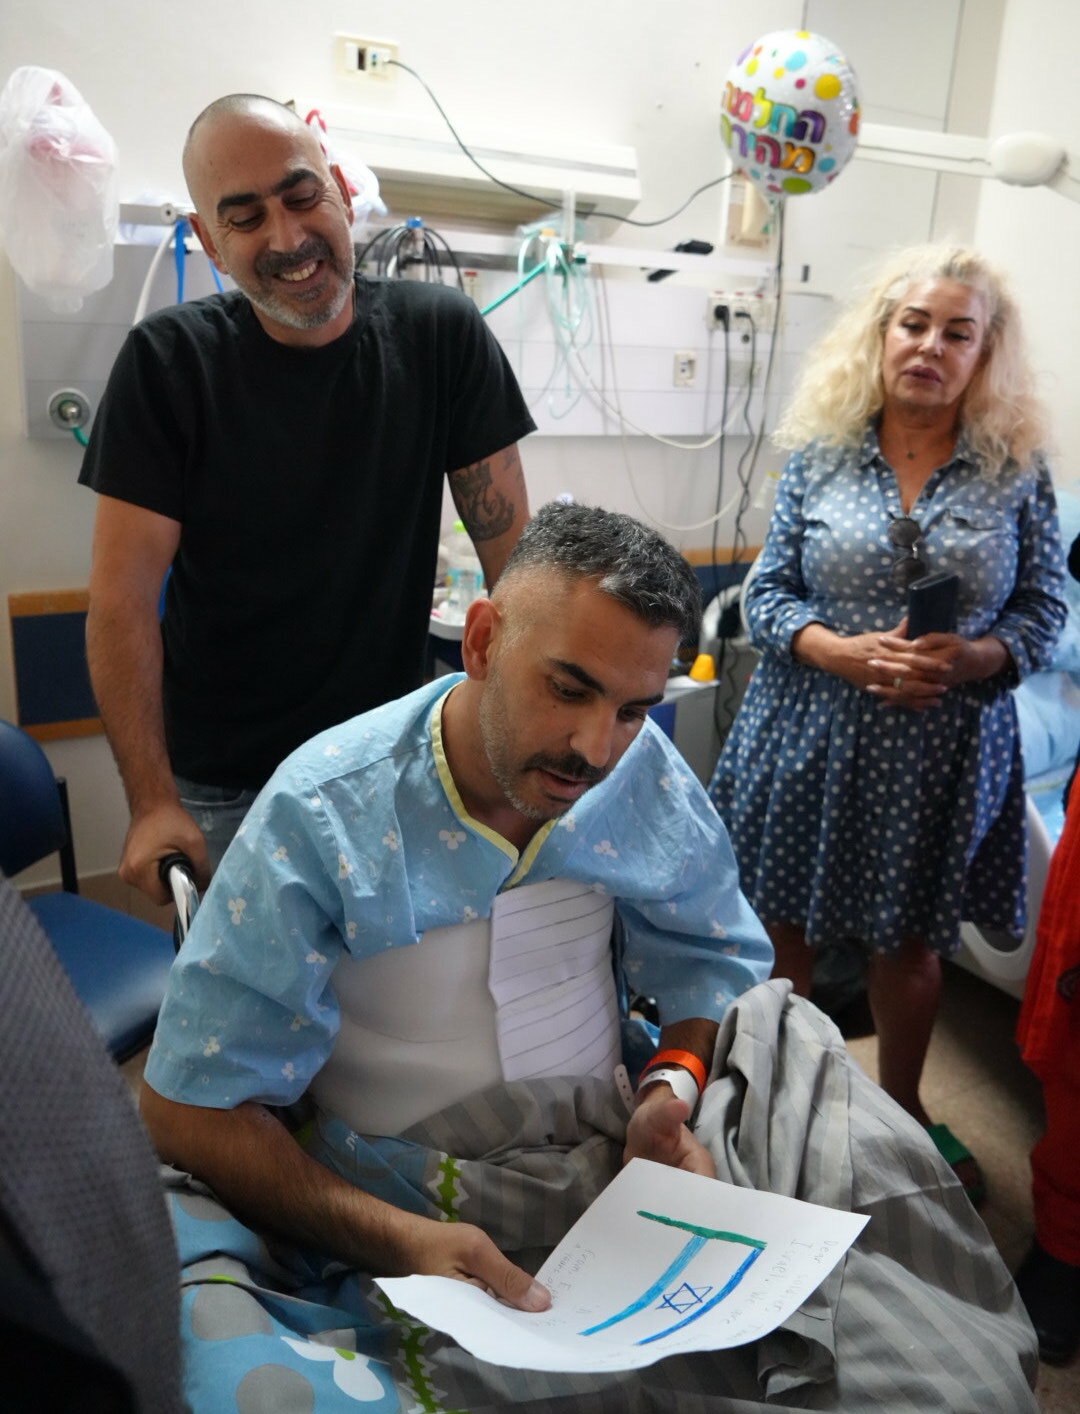 An IDF soldier wounded in battle recovering in Soroka hospital reads cards from American community members together with his family.